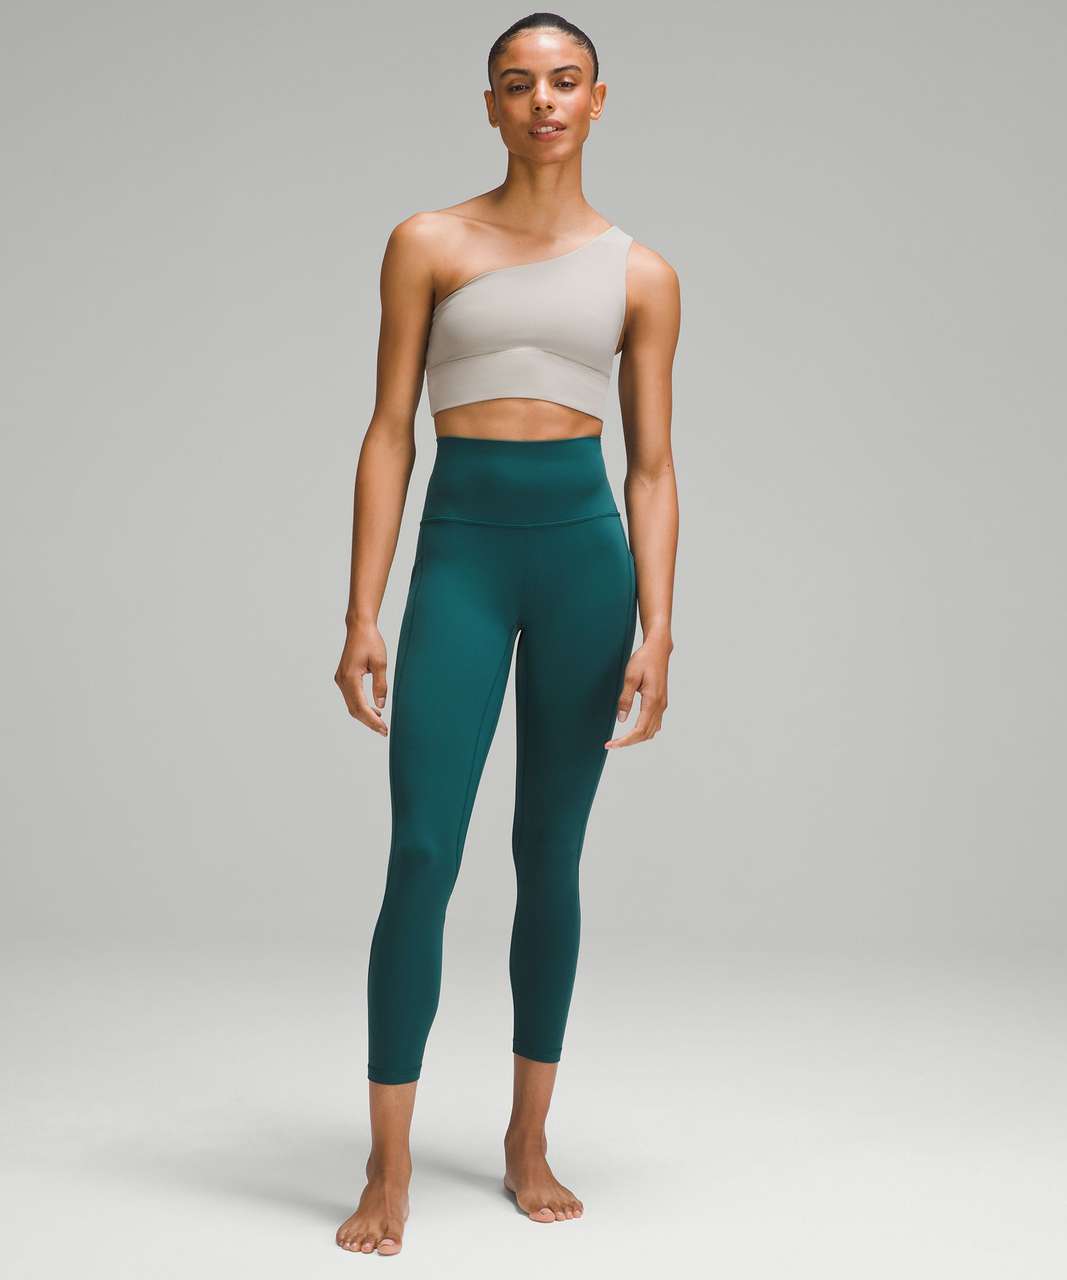 Lululemon Align™ High-Rise Pants with Pockets 25 - ShopStyle